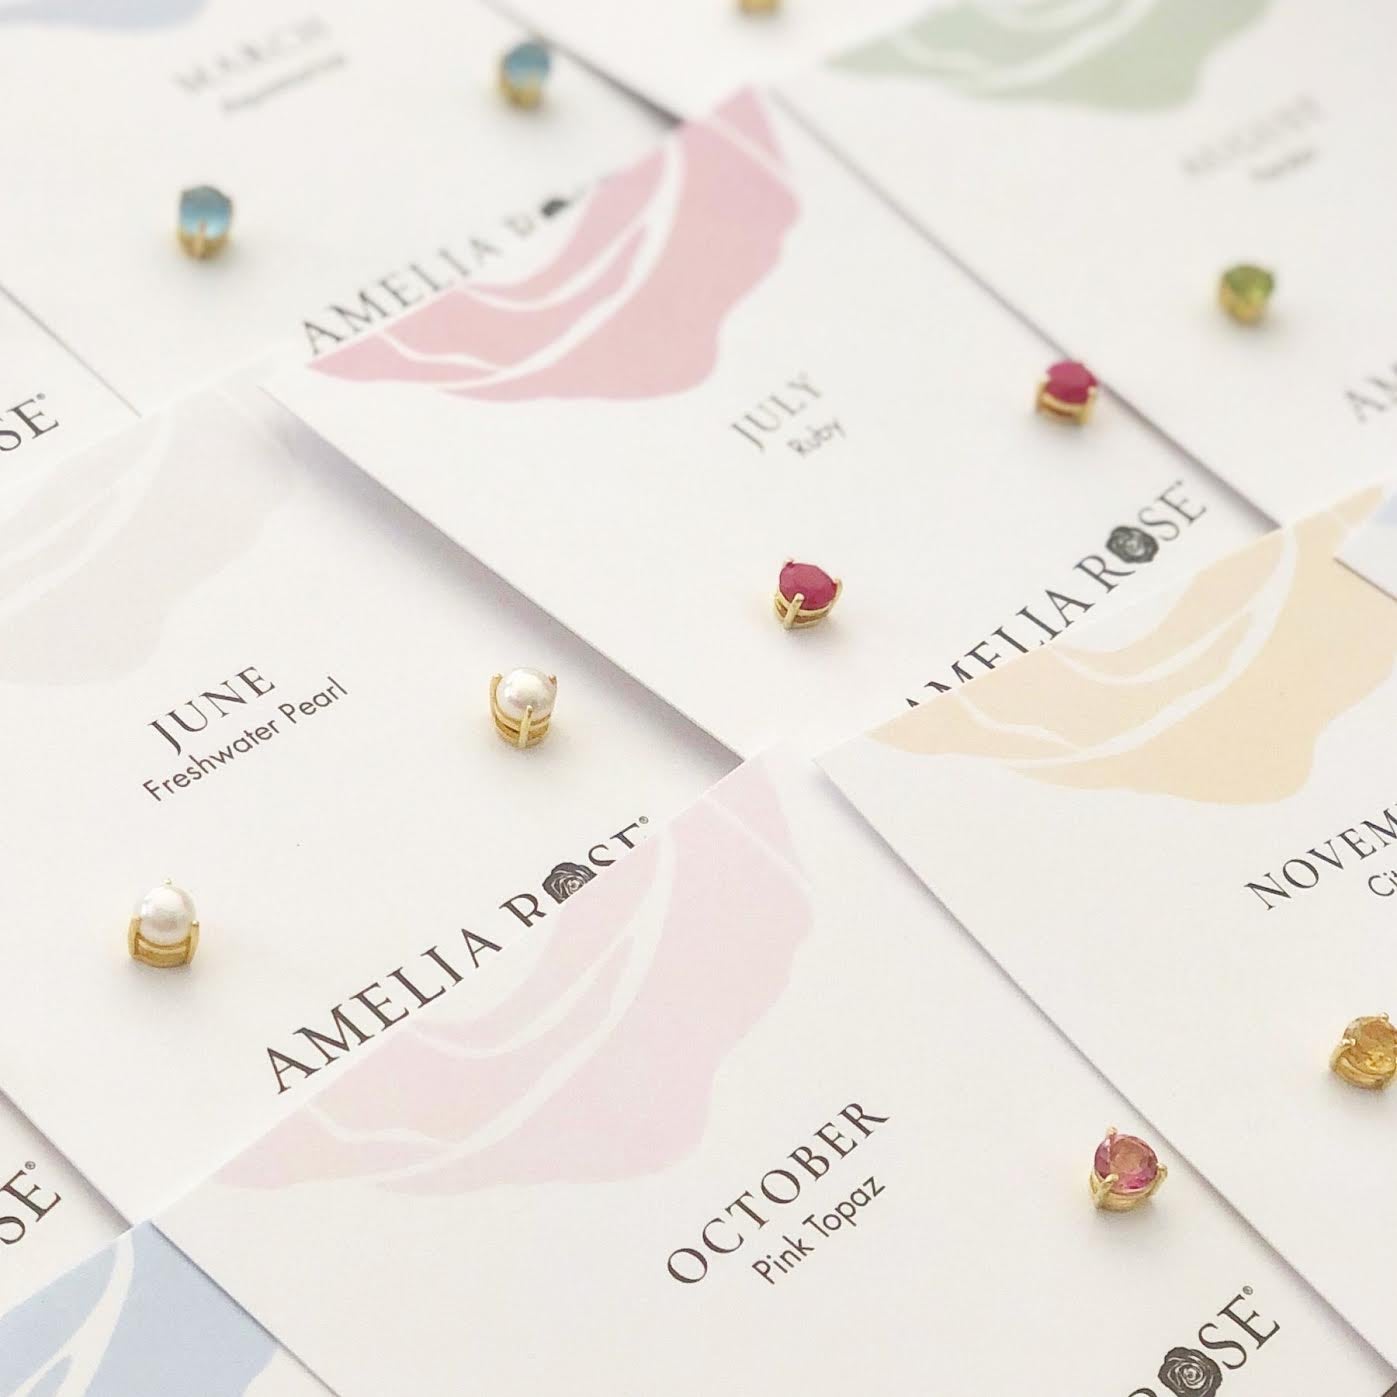 Image of several stud earrings, including pearl, ruby, pink topaz, and citrine